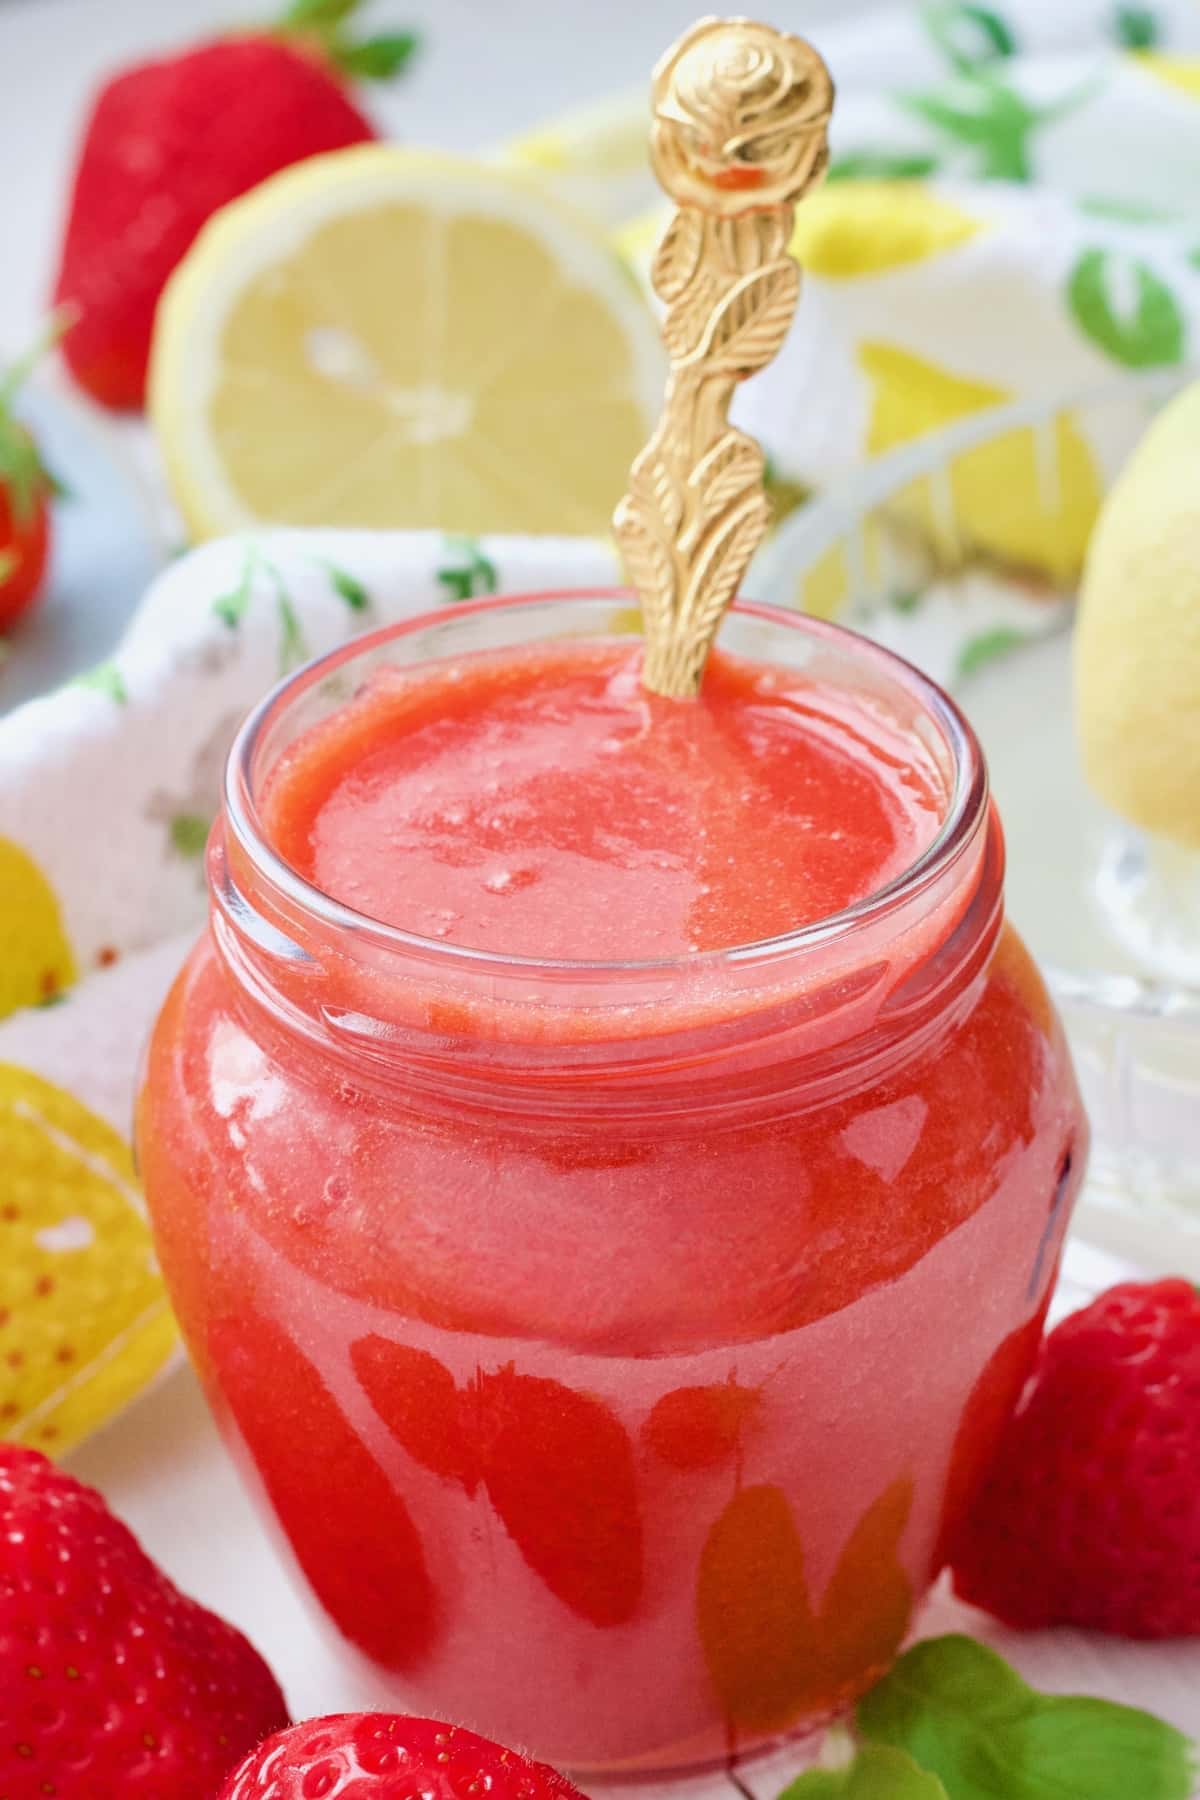 Strawberry coulis in a jar with a spoon.